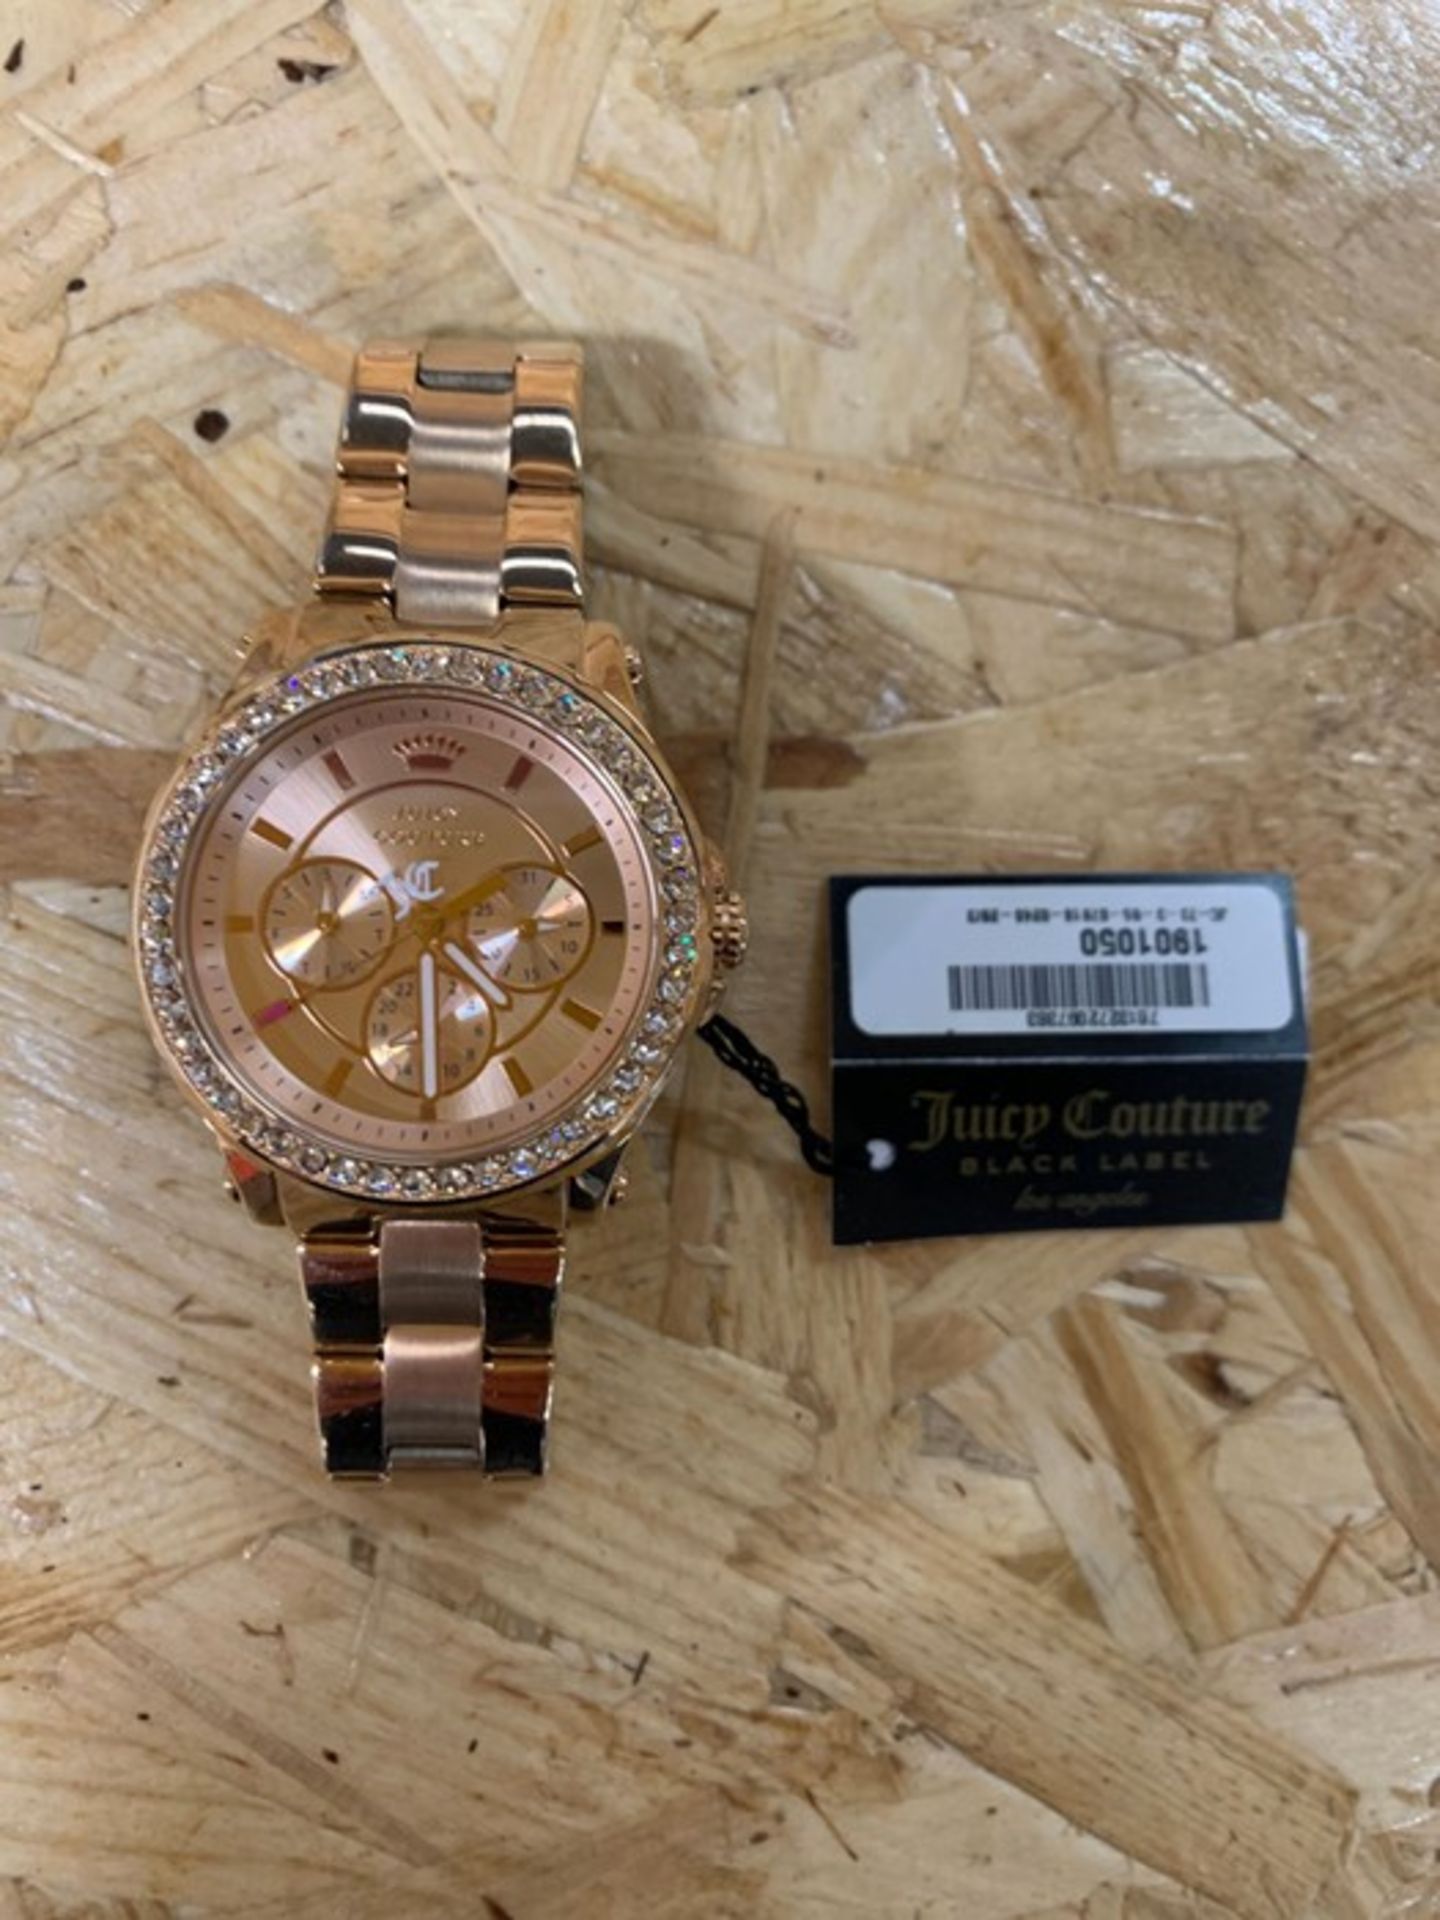 I x UNBOXED LADIES JUICY COUTURE PEDIGREE WATCH 1901050 IN ROSE GOLD RRP £150